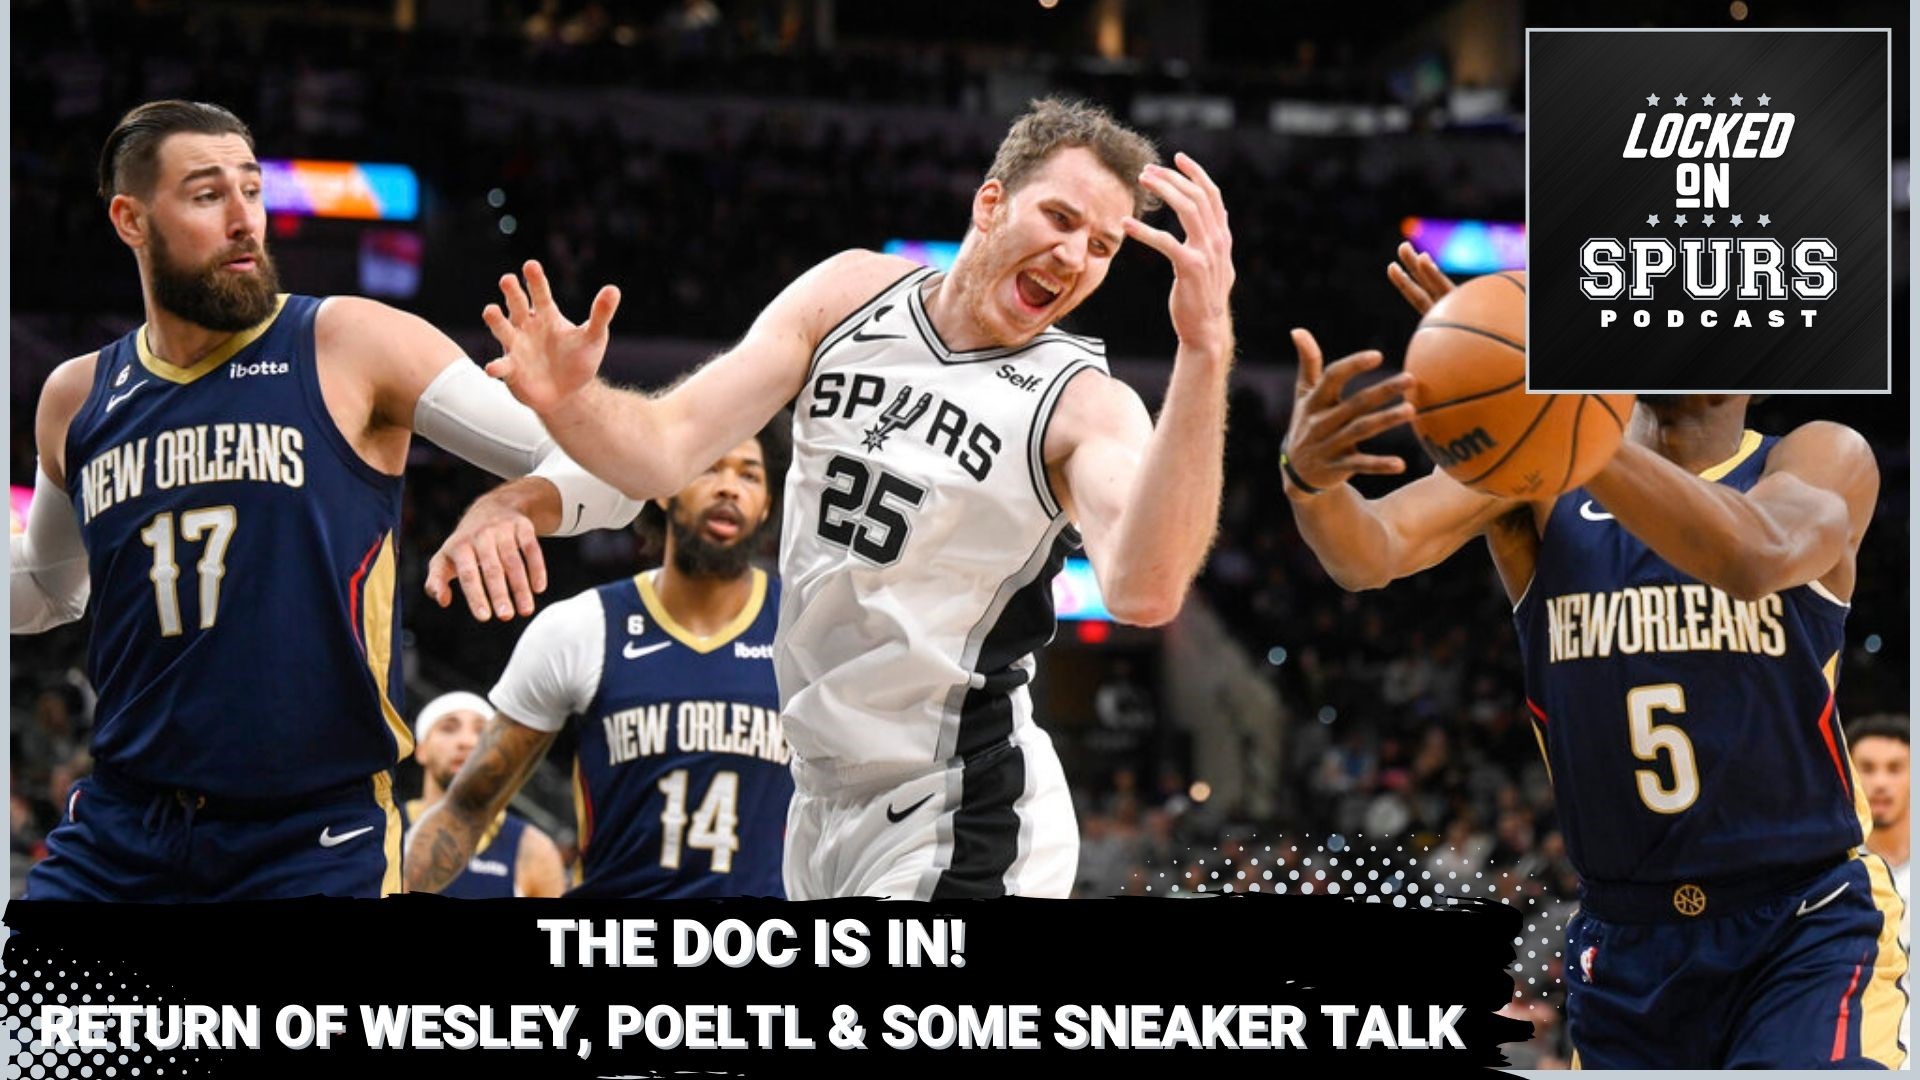 Let's get the latest news on the Spurs injury front.